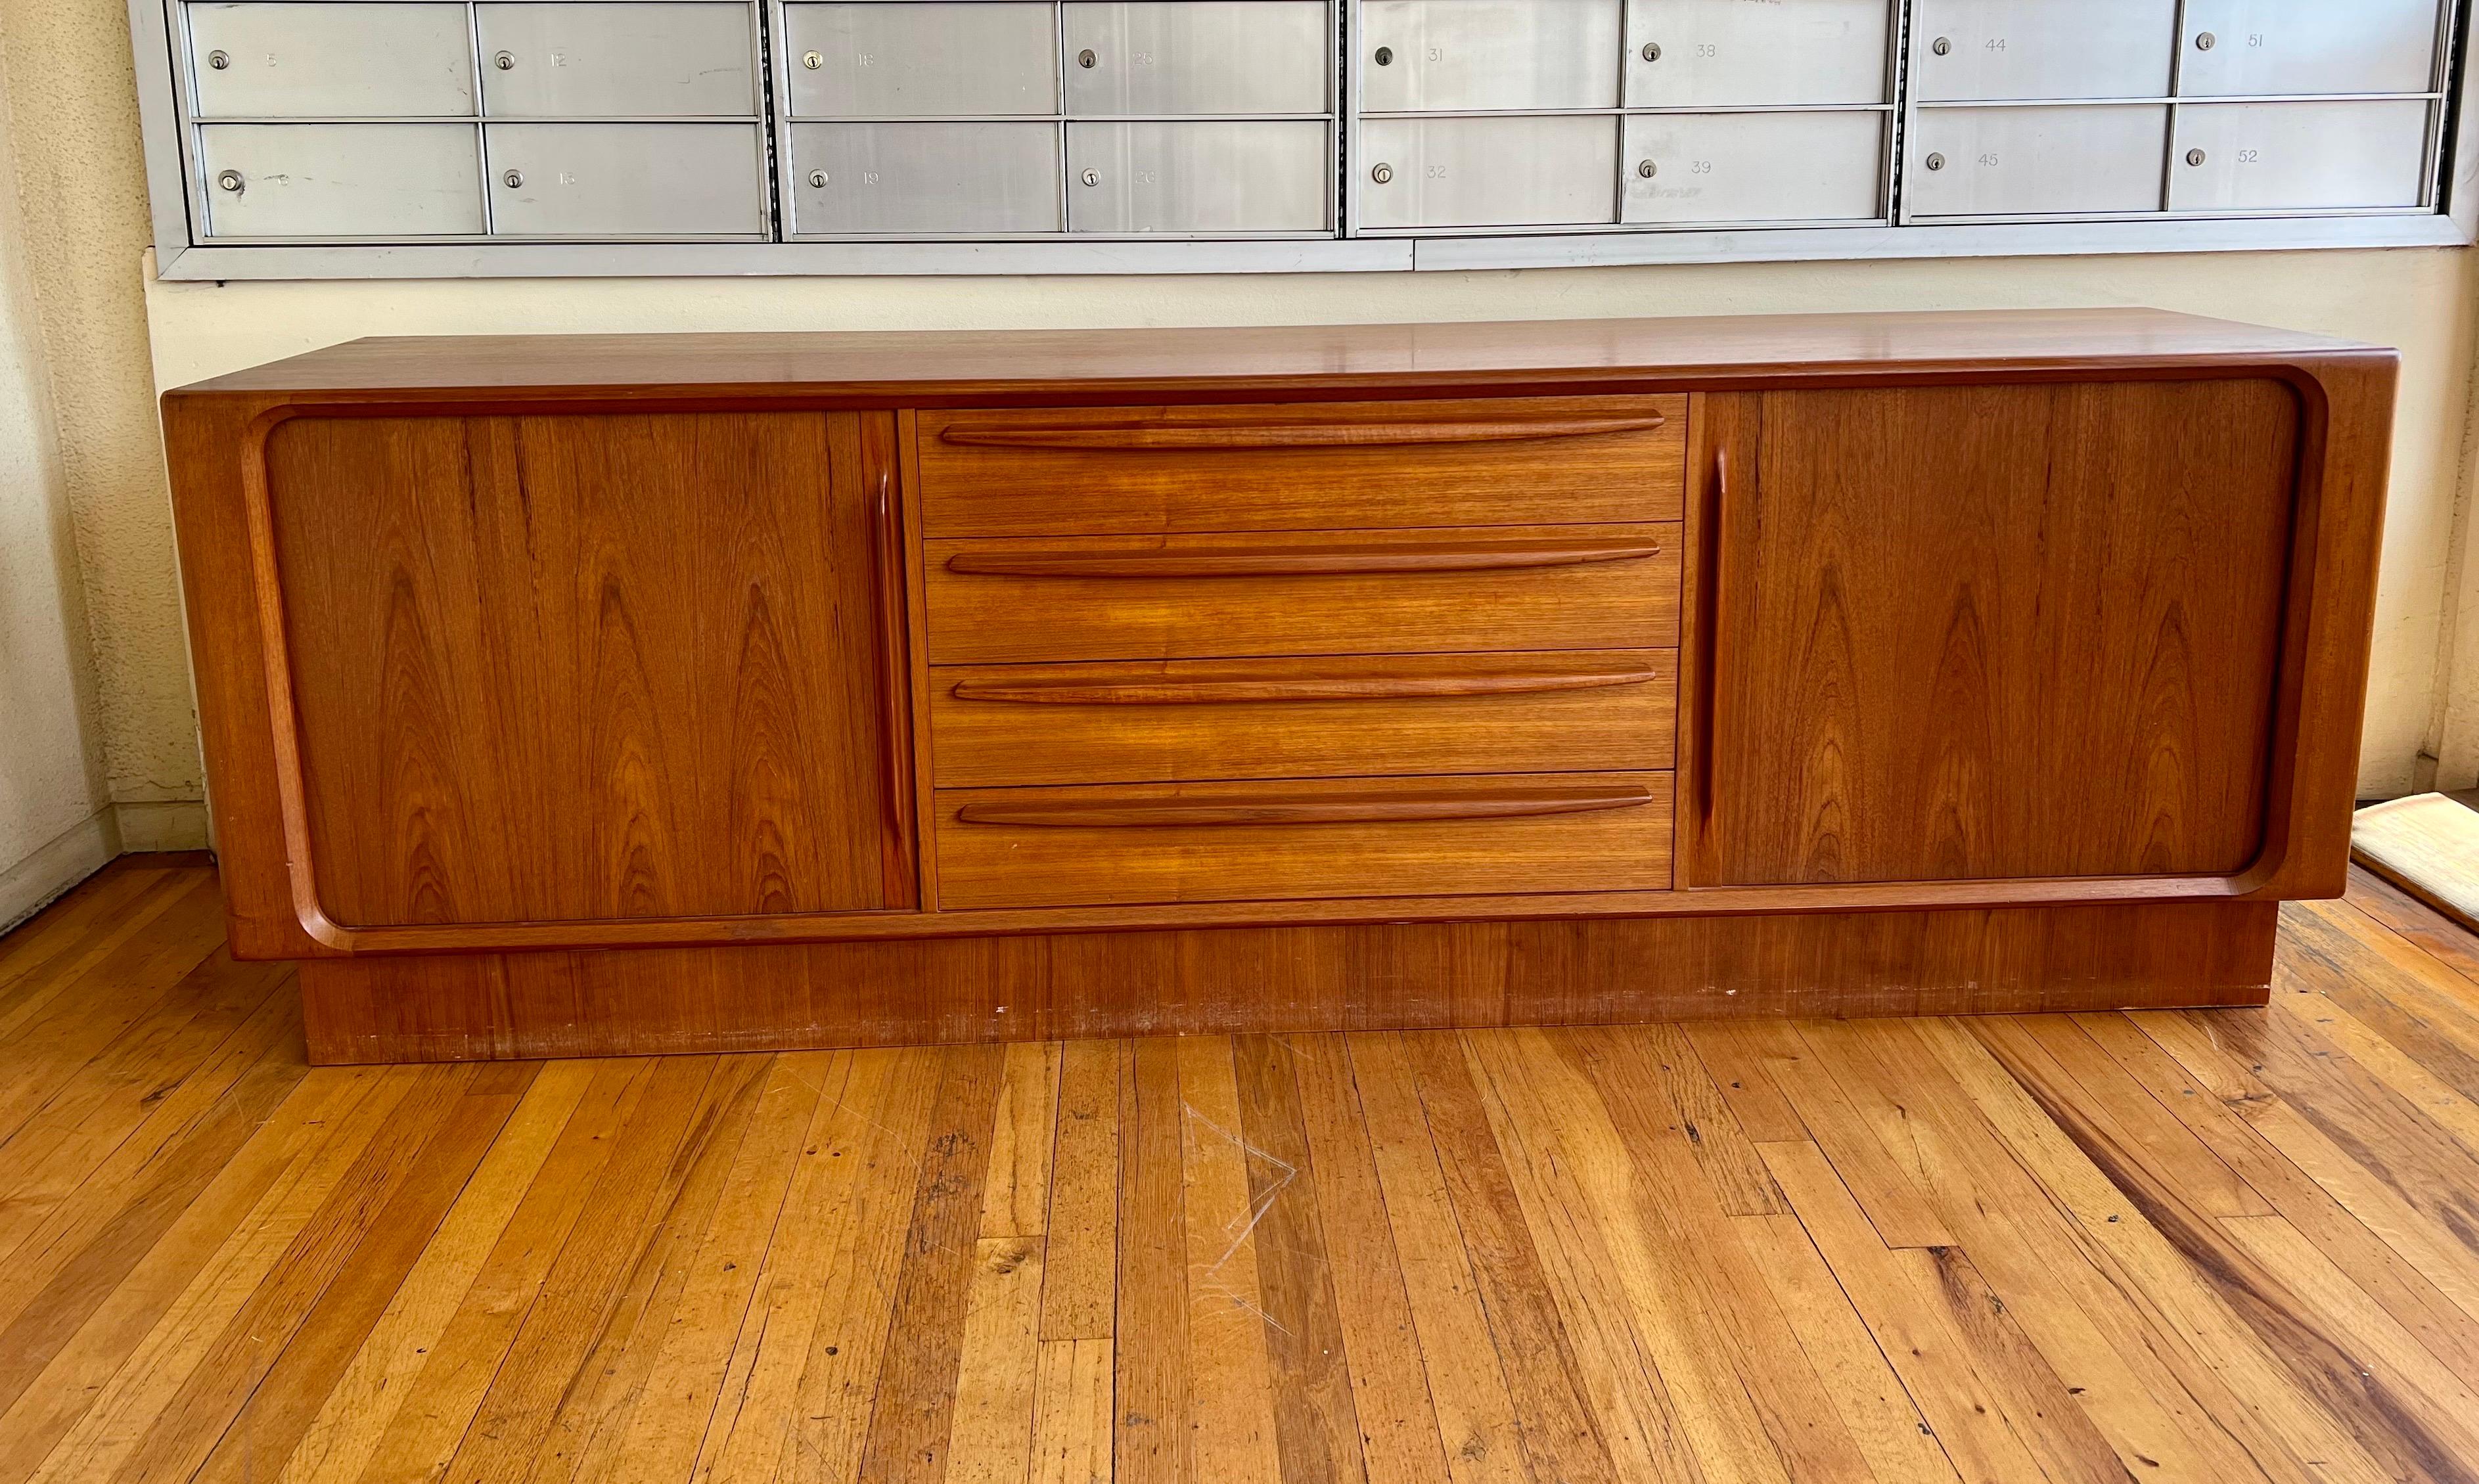 Beautiful Danish modern low tambour door teak credenza sideboard manufactured in Denmark in the 1960s. Four large center drawers are flanked by a pair of tambour doors revealing an adjustable shelf on one side and three tray drawers on the other.